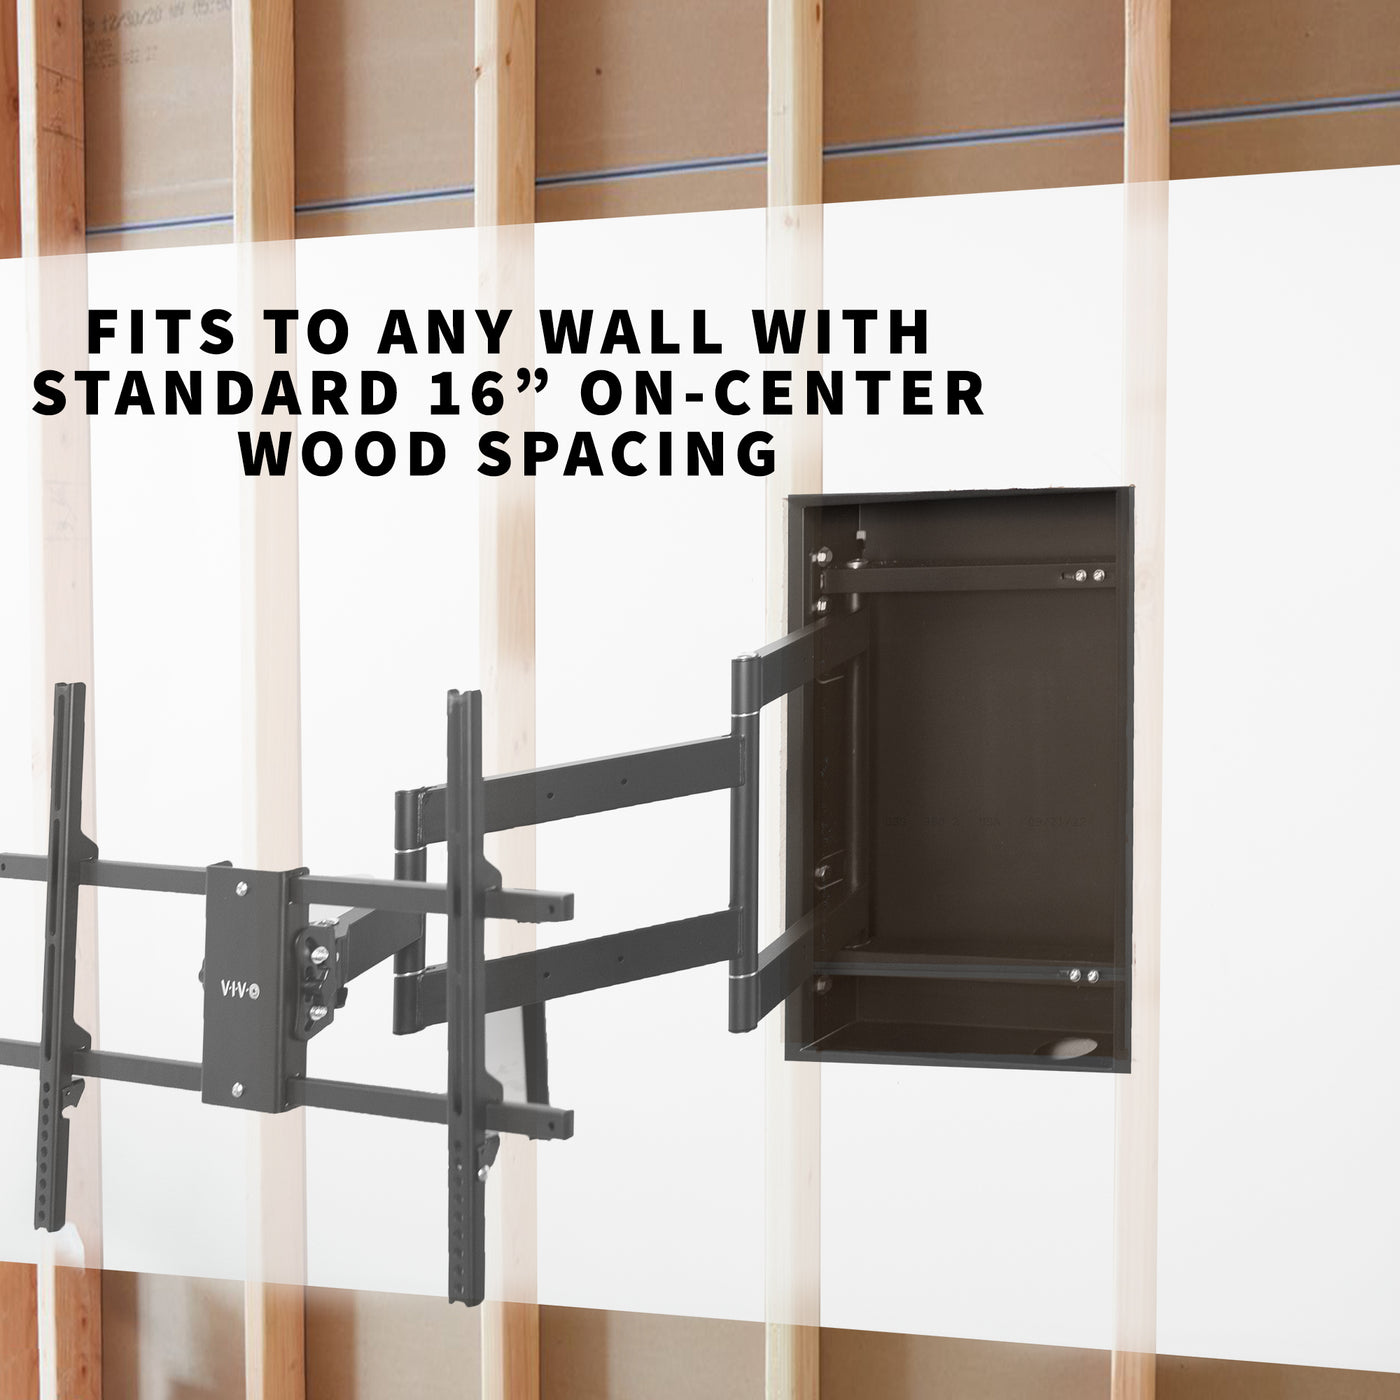 The TV stand is compatible with most standard living spaces where standard 16’ studs exist in the walls.